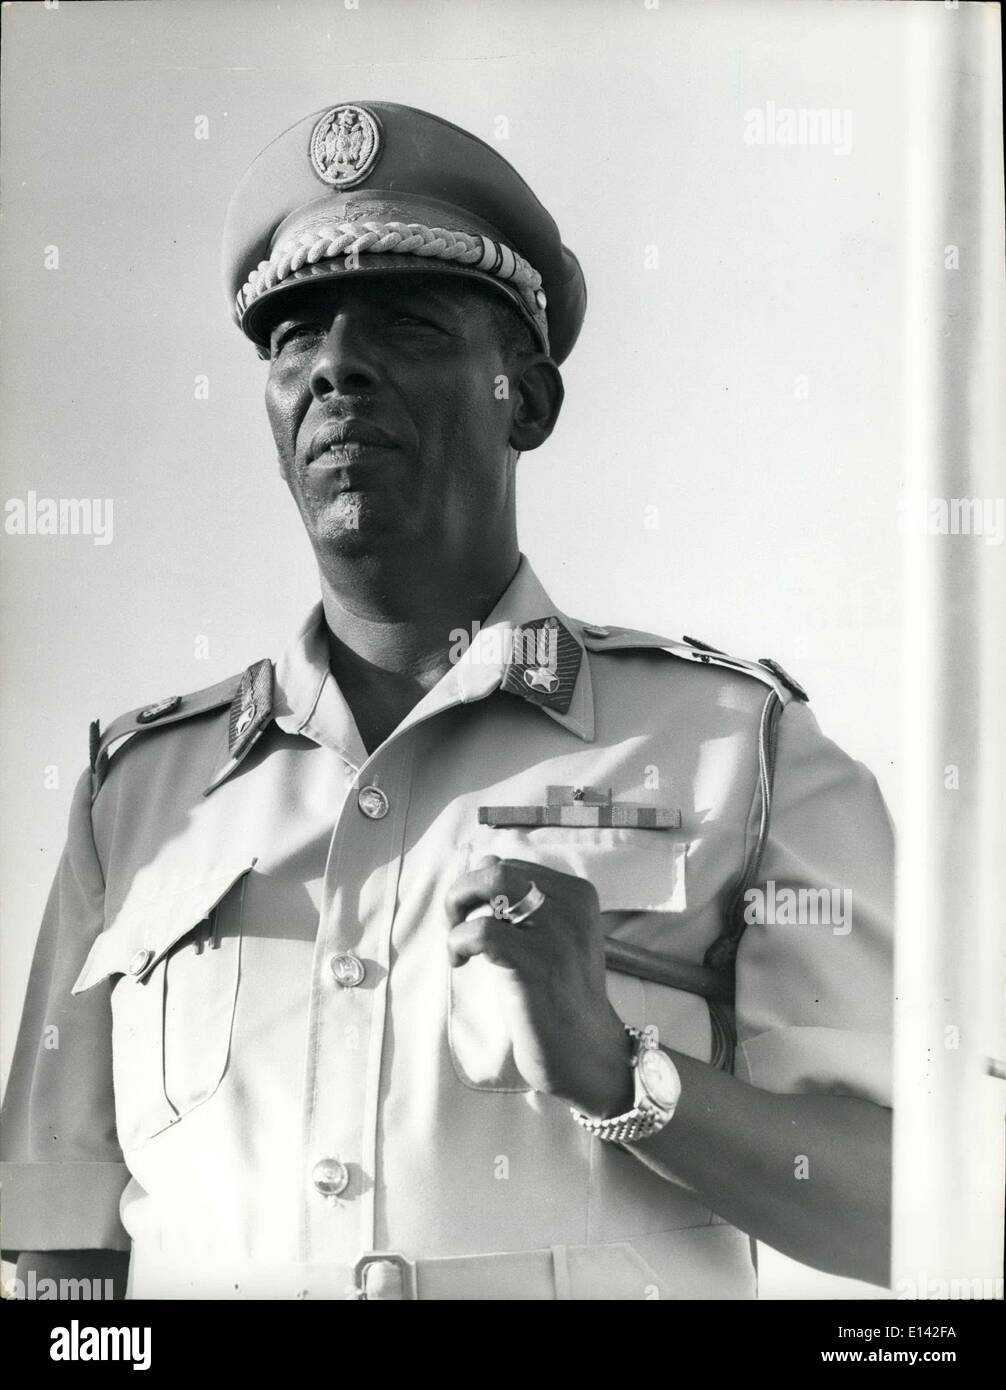 Mar. 31, 2012 - General Mohamed Siyad Barre, President of Somali Democratic Republic; Born Lugh Ferrandi, 1919. Educated Lugh Forrandi, Mogadishu. Joined Police Force, 1941. Regional Divisional Commander, 1950. Sent to Italian Military Academy, 1950. Colonel, Deputy Commander of the Army, 1959. Brigadier-General, Commander of the Army, 1965. President of the Supreme Revolutionary Council, 1969. Resigned as C-inC, 1970. Married, 20 children. Stock Photo